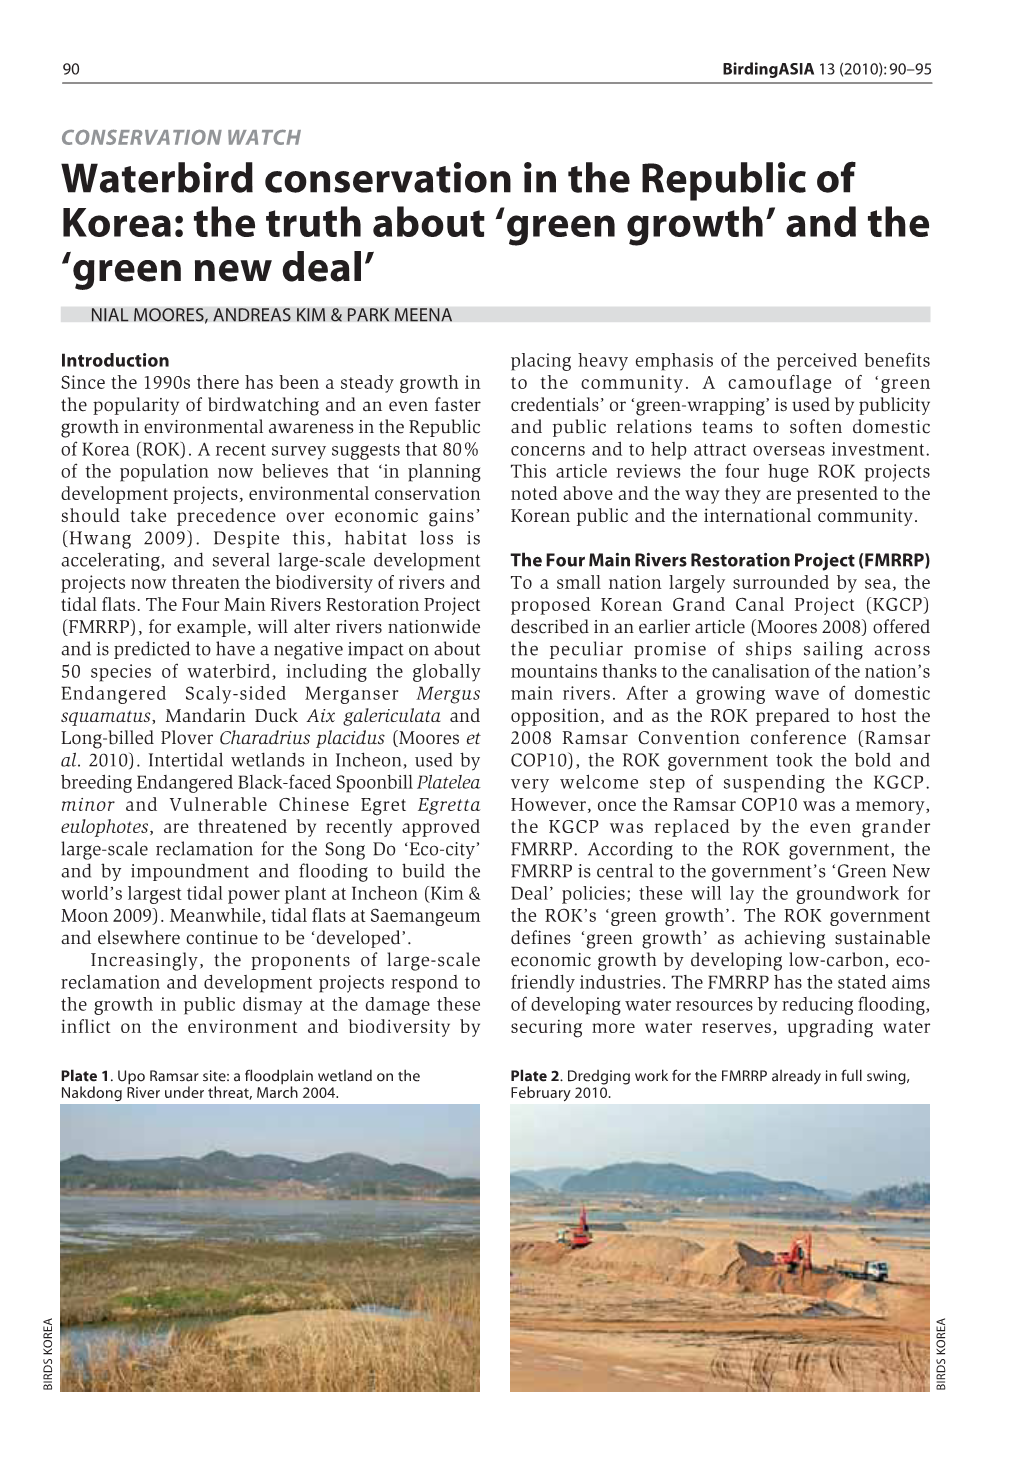 Waterbird Conservation in the Republic of Korea: the Truth About ‘Green Growth’ and the ‘Green New Deal’ NIAL MOORES, ANDREAS KIM & PARK MEENA